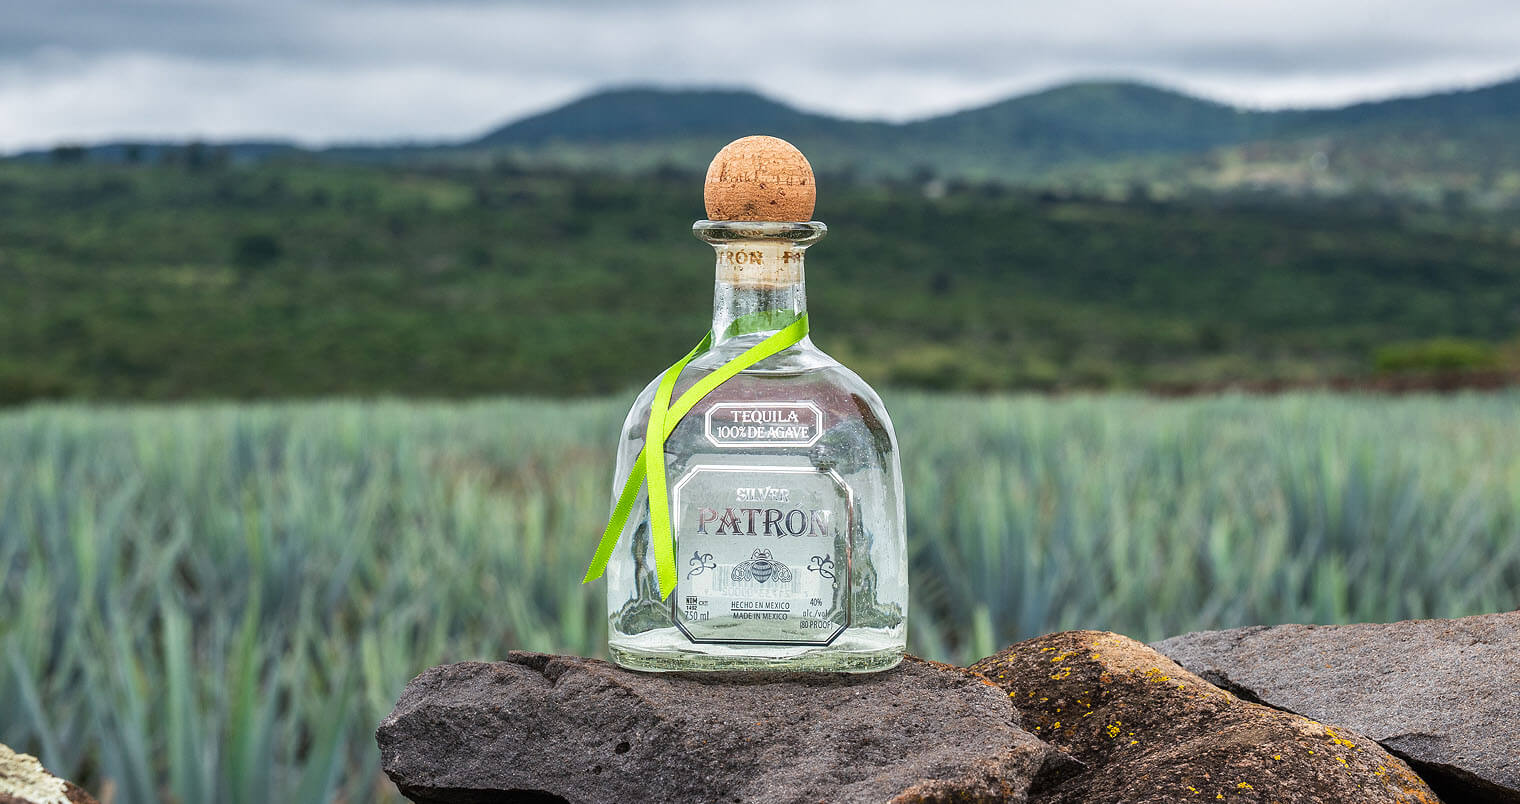 PATRÓN Tequila Verified Additive-Free, featured image